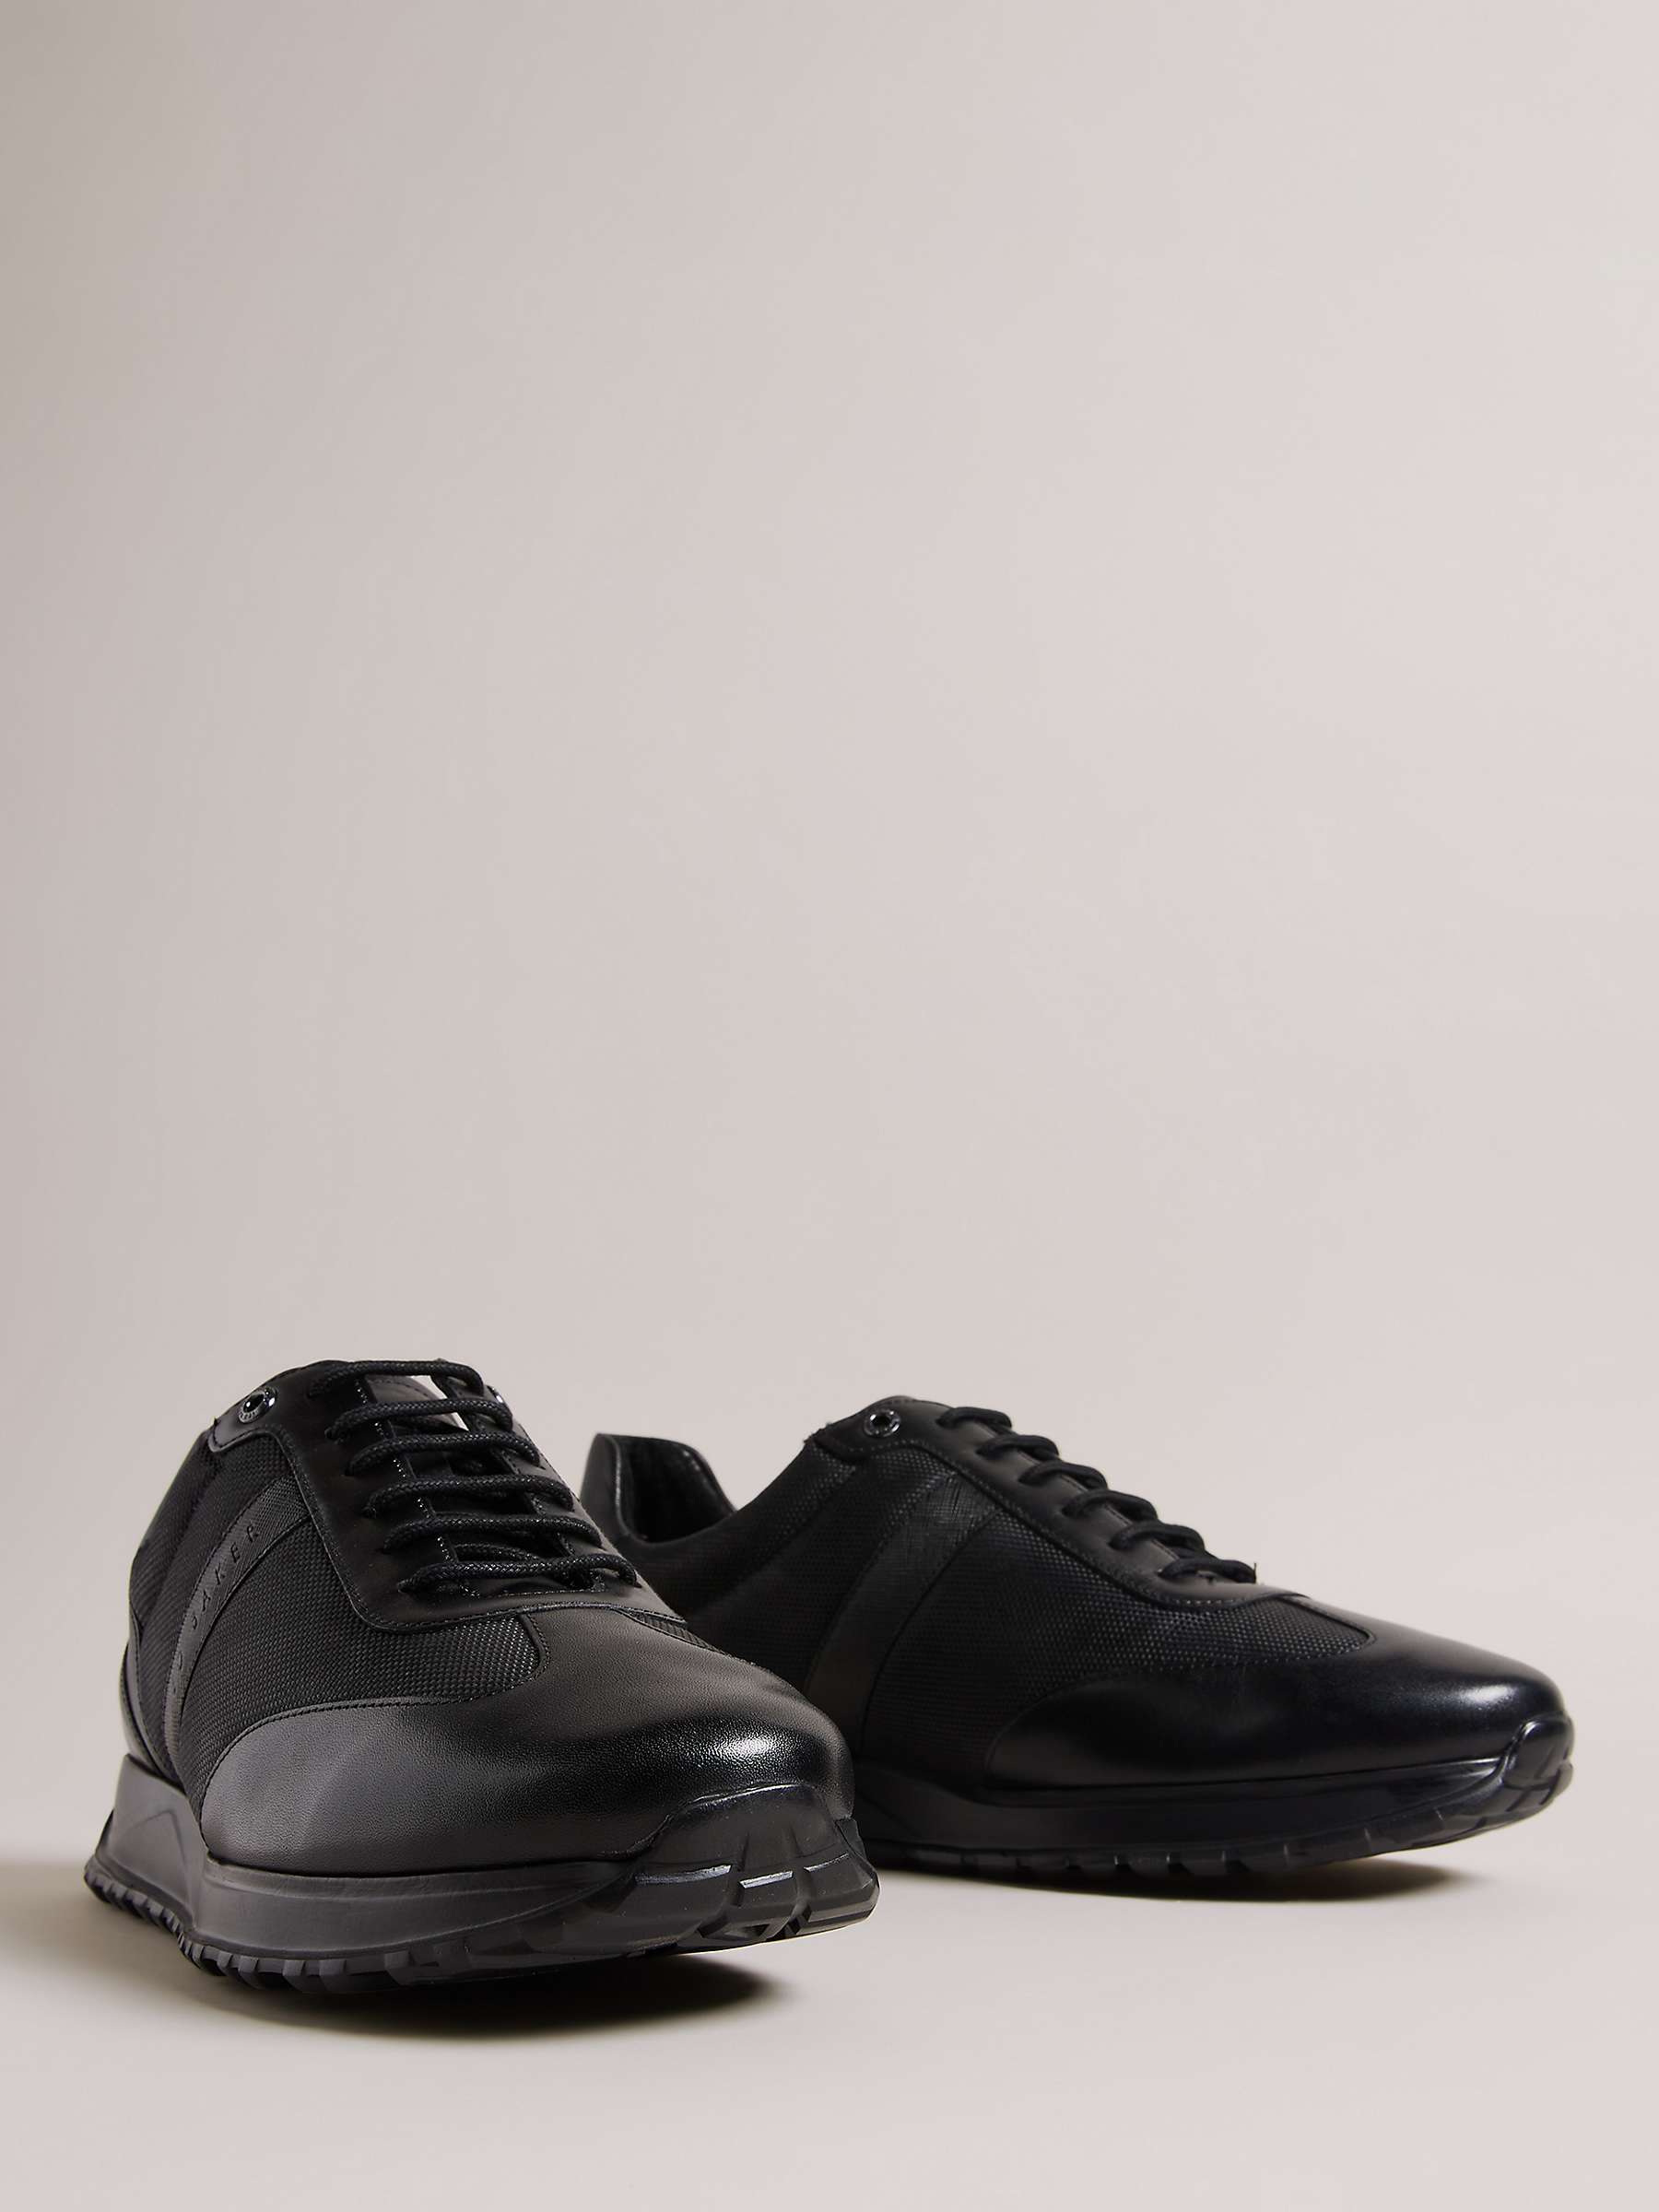 Ted Baker Marckus Leather Light Sole Trainers, Black at John Lewis ...